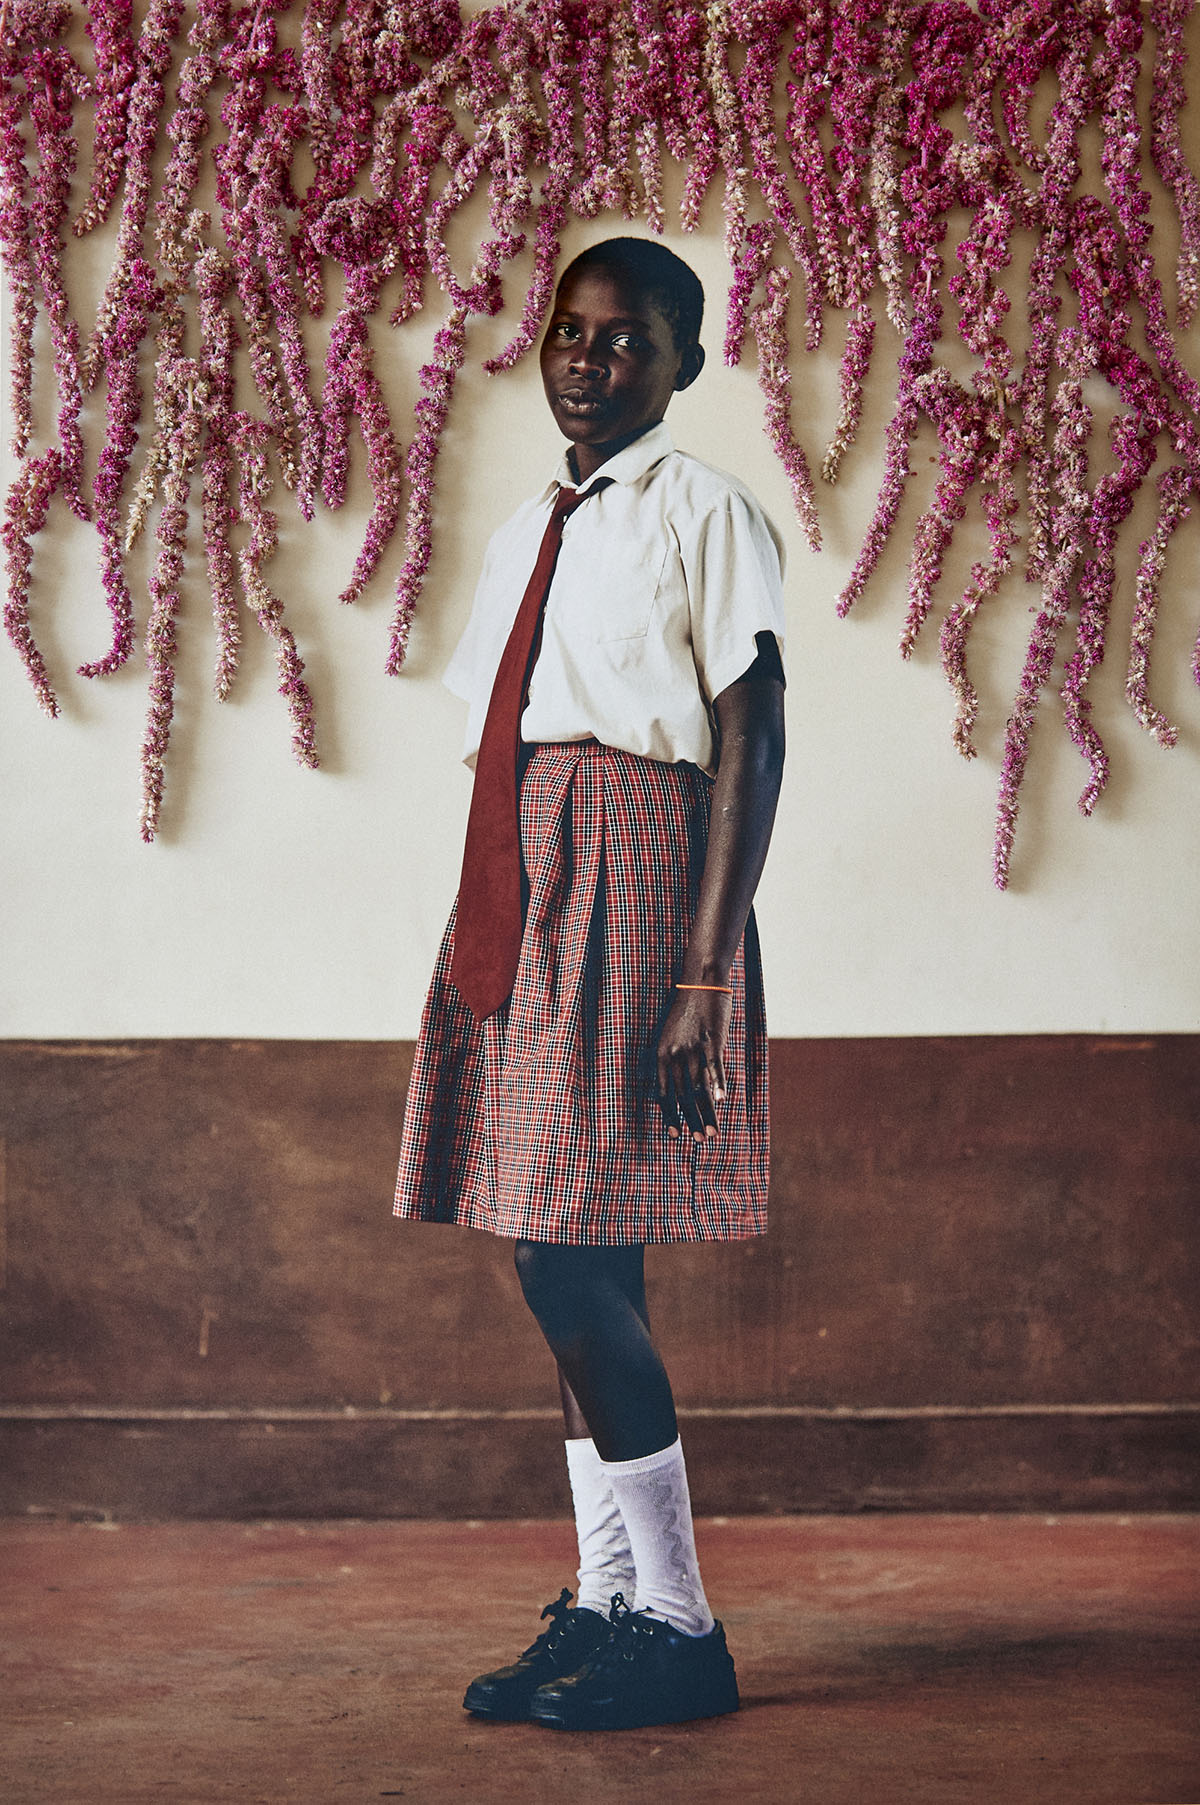 Portrait of Michealle Naeku (12 years), from the series ‘The Right To Play’, 2022. Lee-Ann Olwage